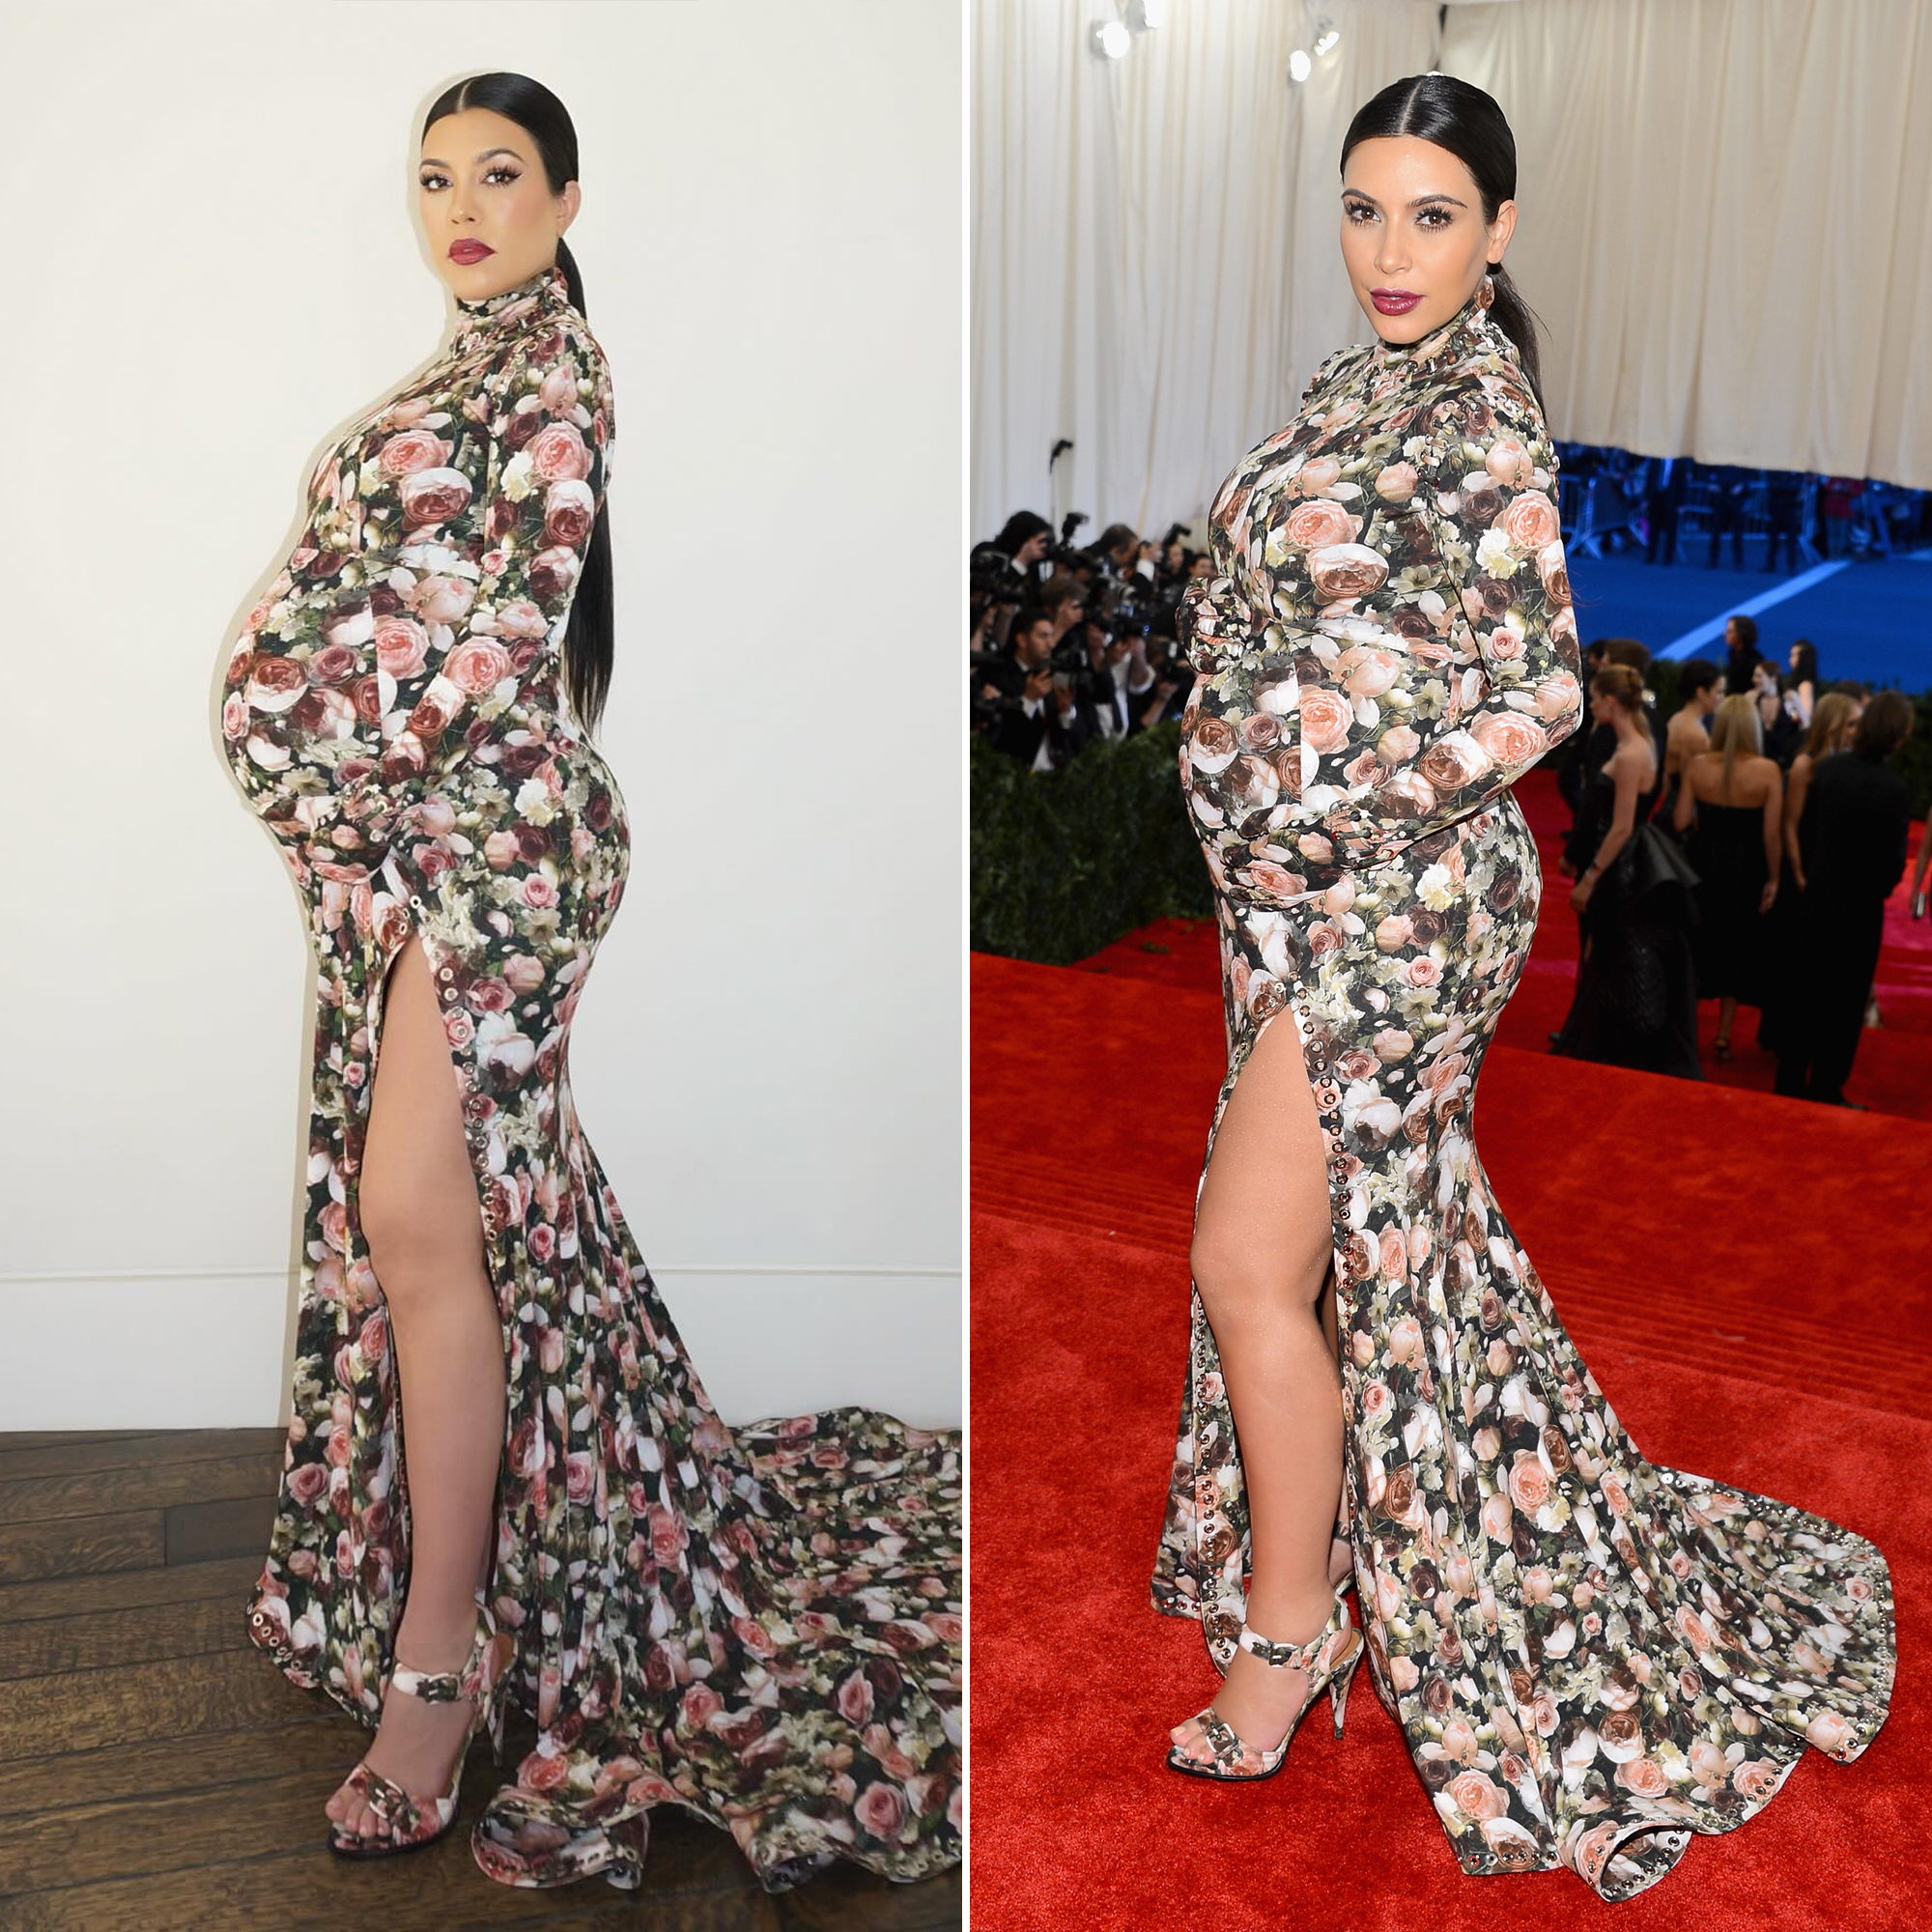 Kim Kardashian finally gives in to maternity style - but where is